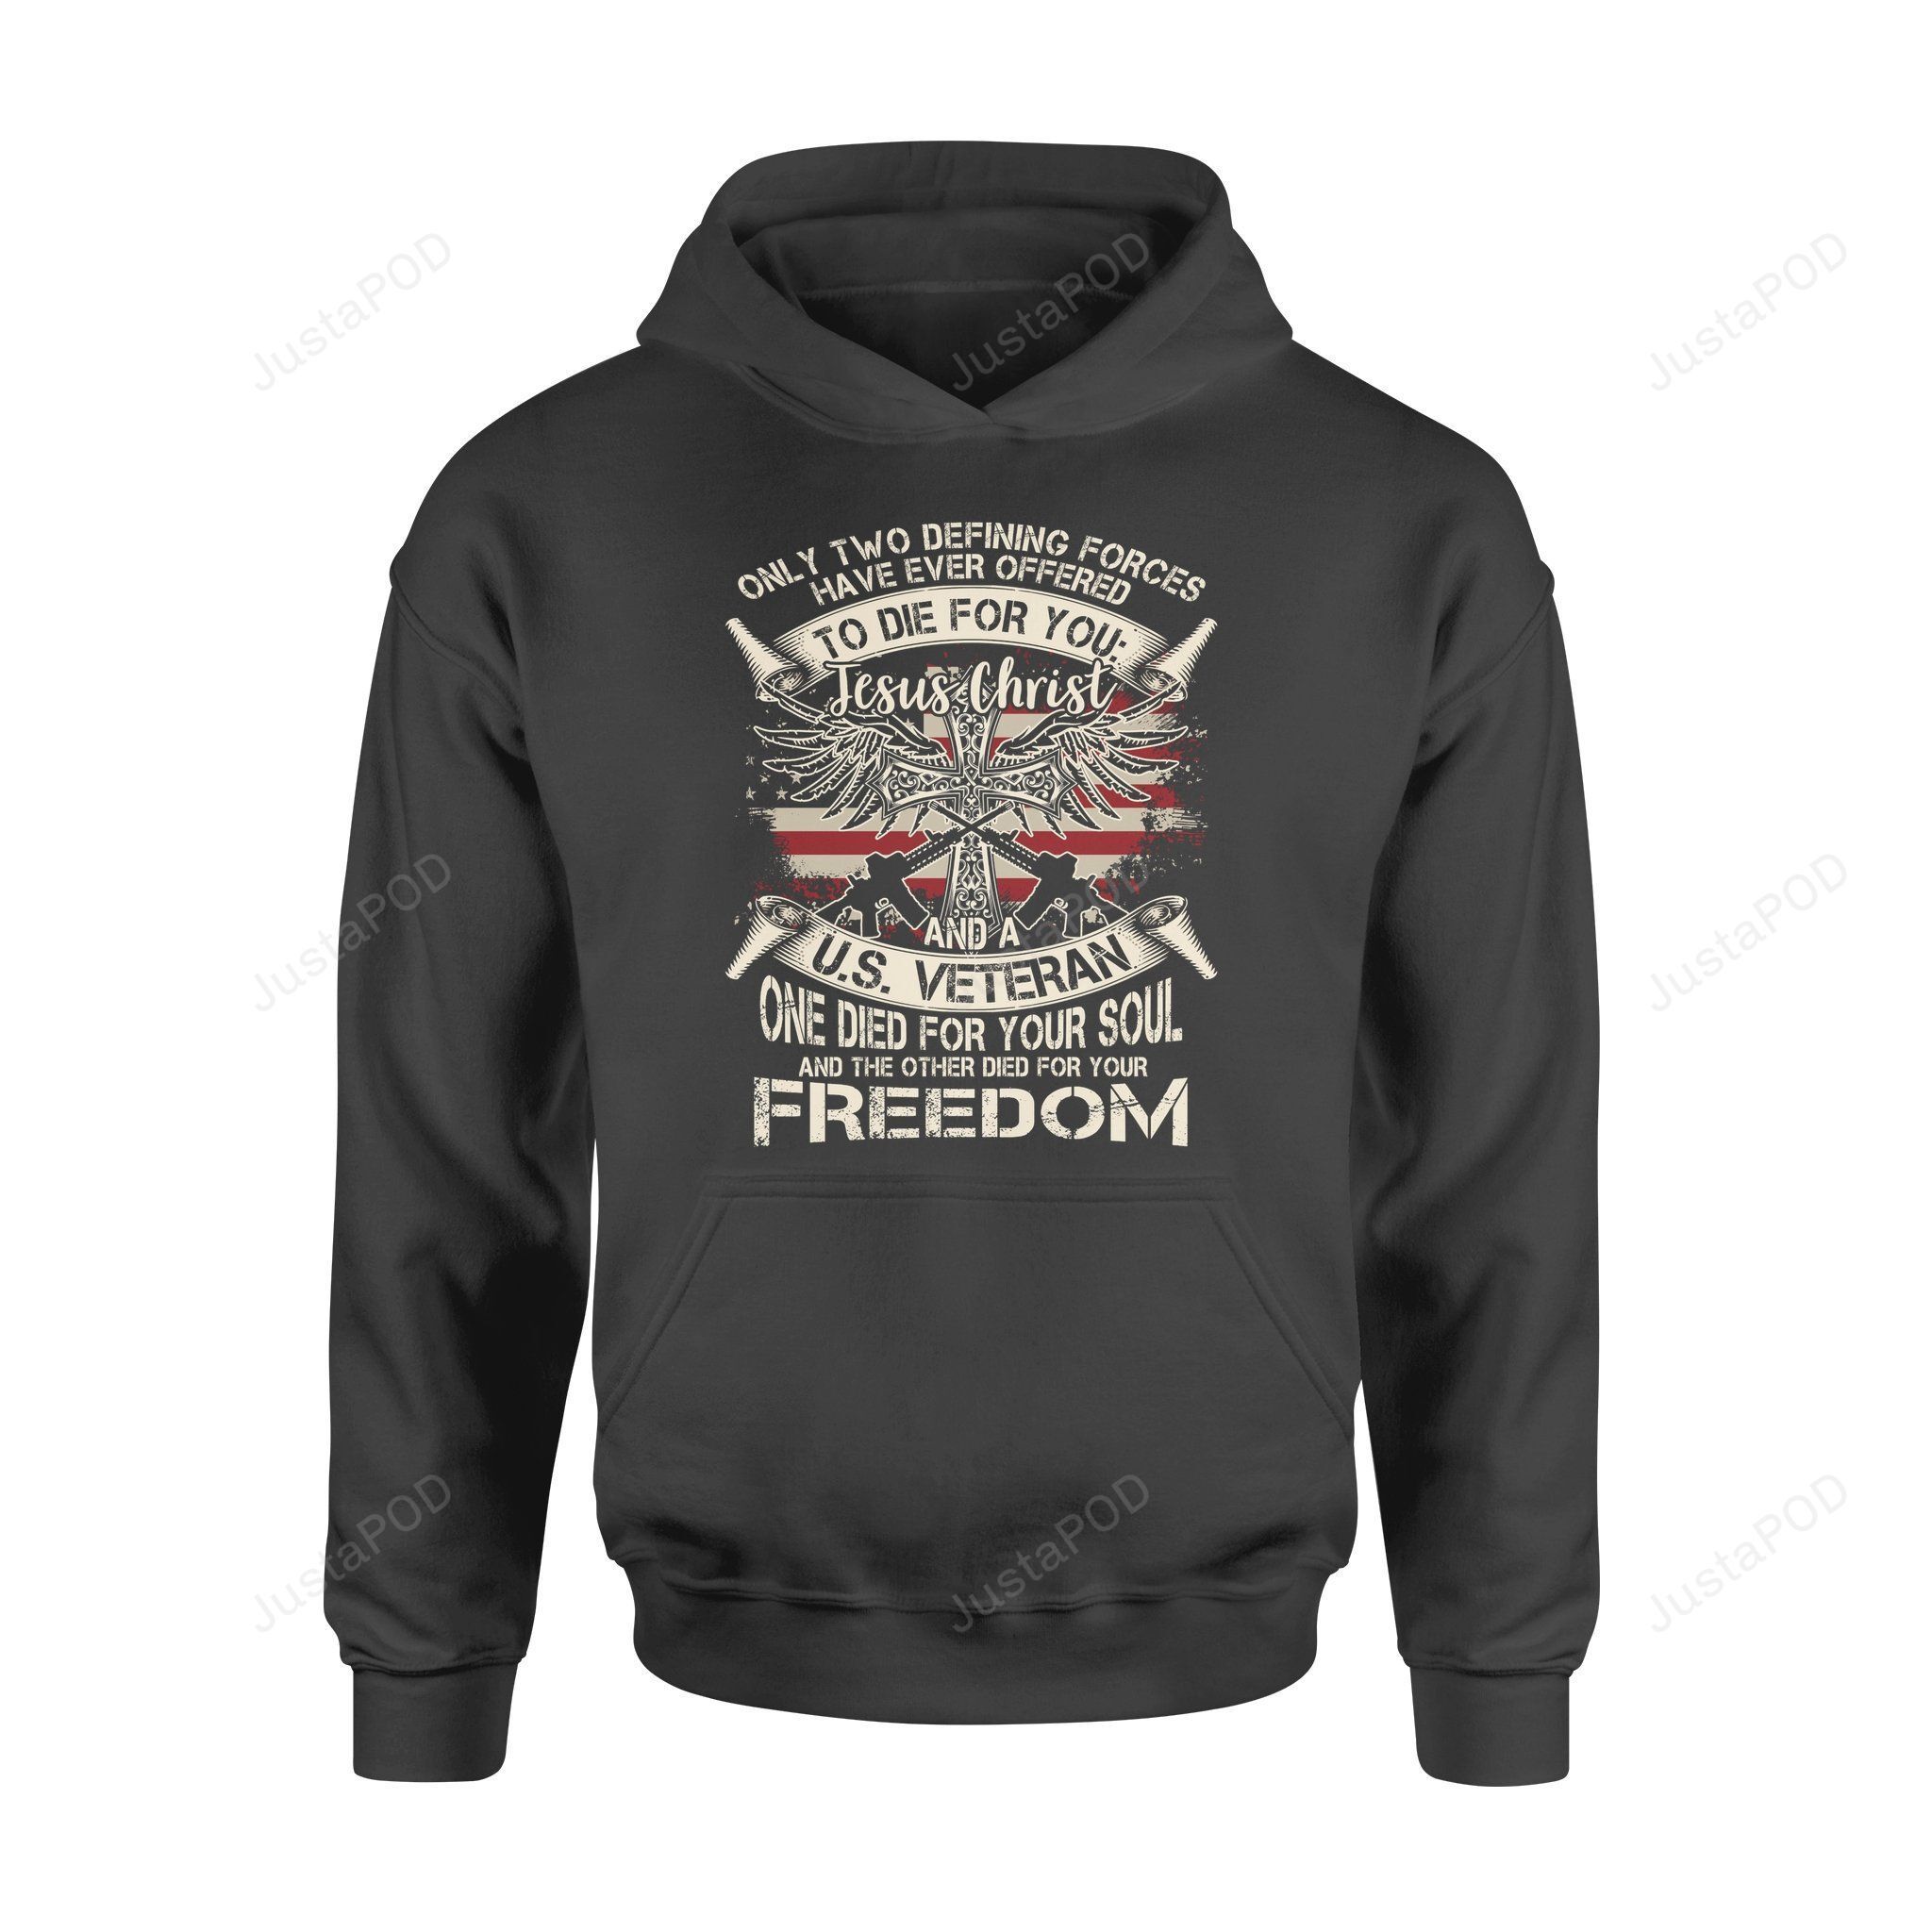 Besteever Only Two Defining Forces Have Ever Offered To Die For You Jesus Christ And A US Veteran Shirt Gift For Couple, Friend, Family � Standard 3D Hoodie For Men Women All Over 3D Printed Hoodie